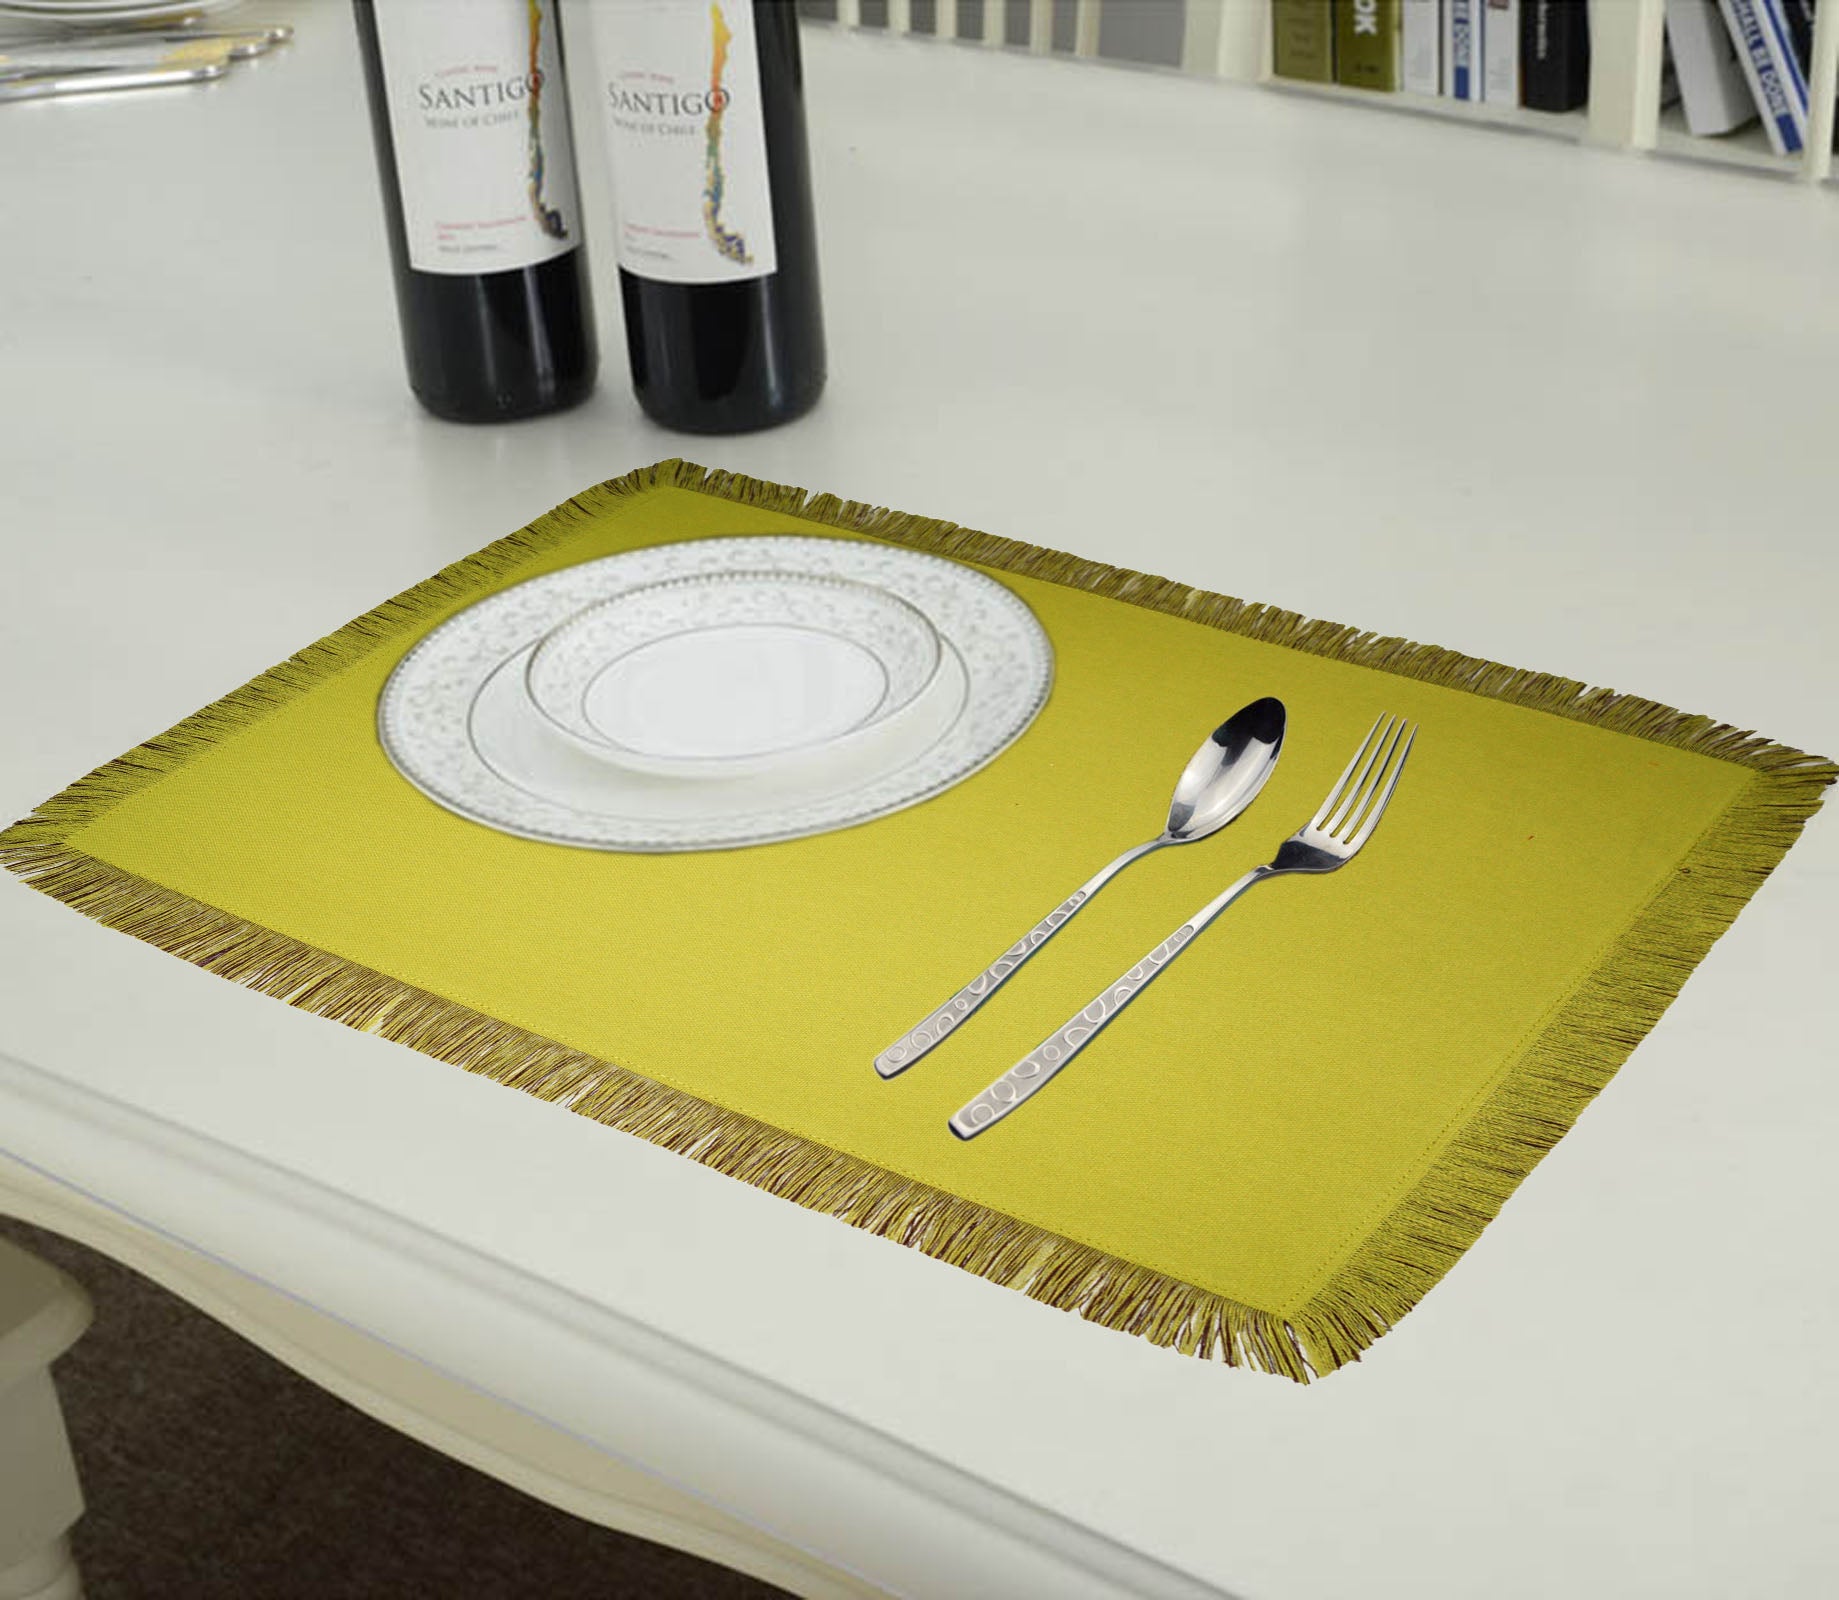 Lushomes dining table mats 6 pieces, Reversible Fancy Fringe dining table mat, dining table accessories for home, kitchen accessories items, Brown and Green  (13 x 19 Inches, Pack of 6)